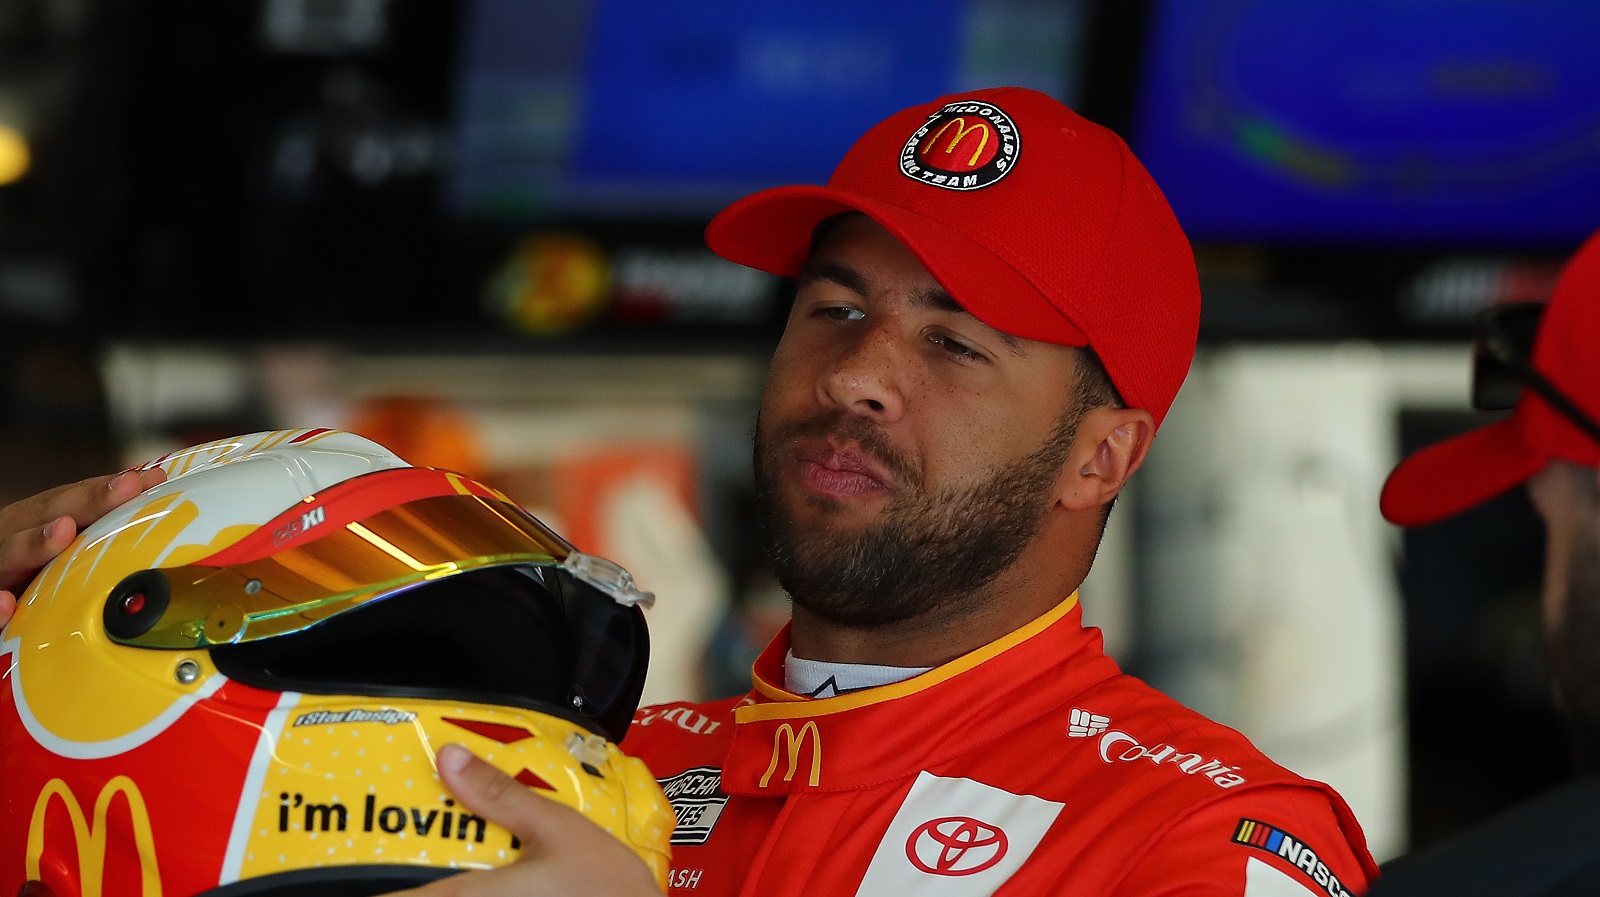 Bubba Wallace, driver of the No. 23 Toyota, prepares for practice for the NASCAR Cup Series Folds of Honor QuikTrip 500 at Atlanta Motor Speedway on March 19, 2022.